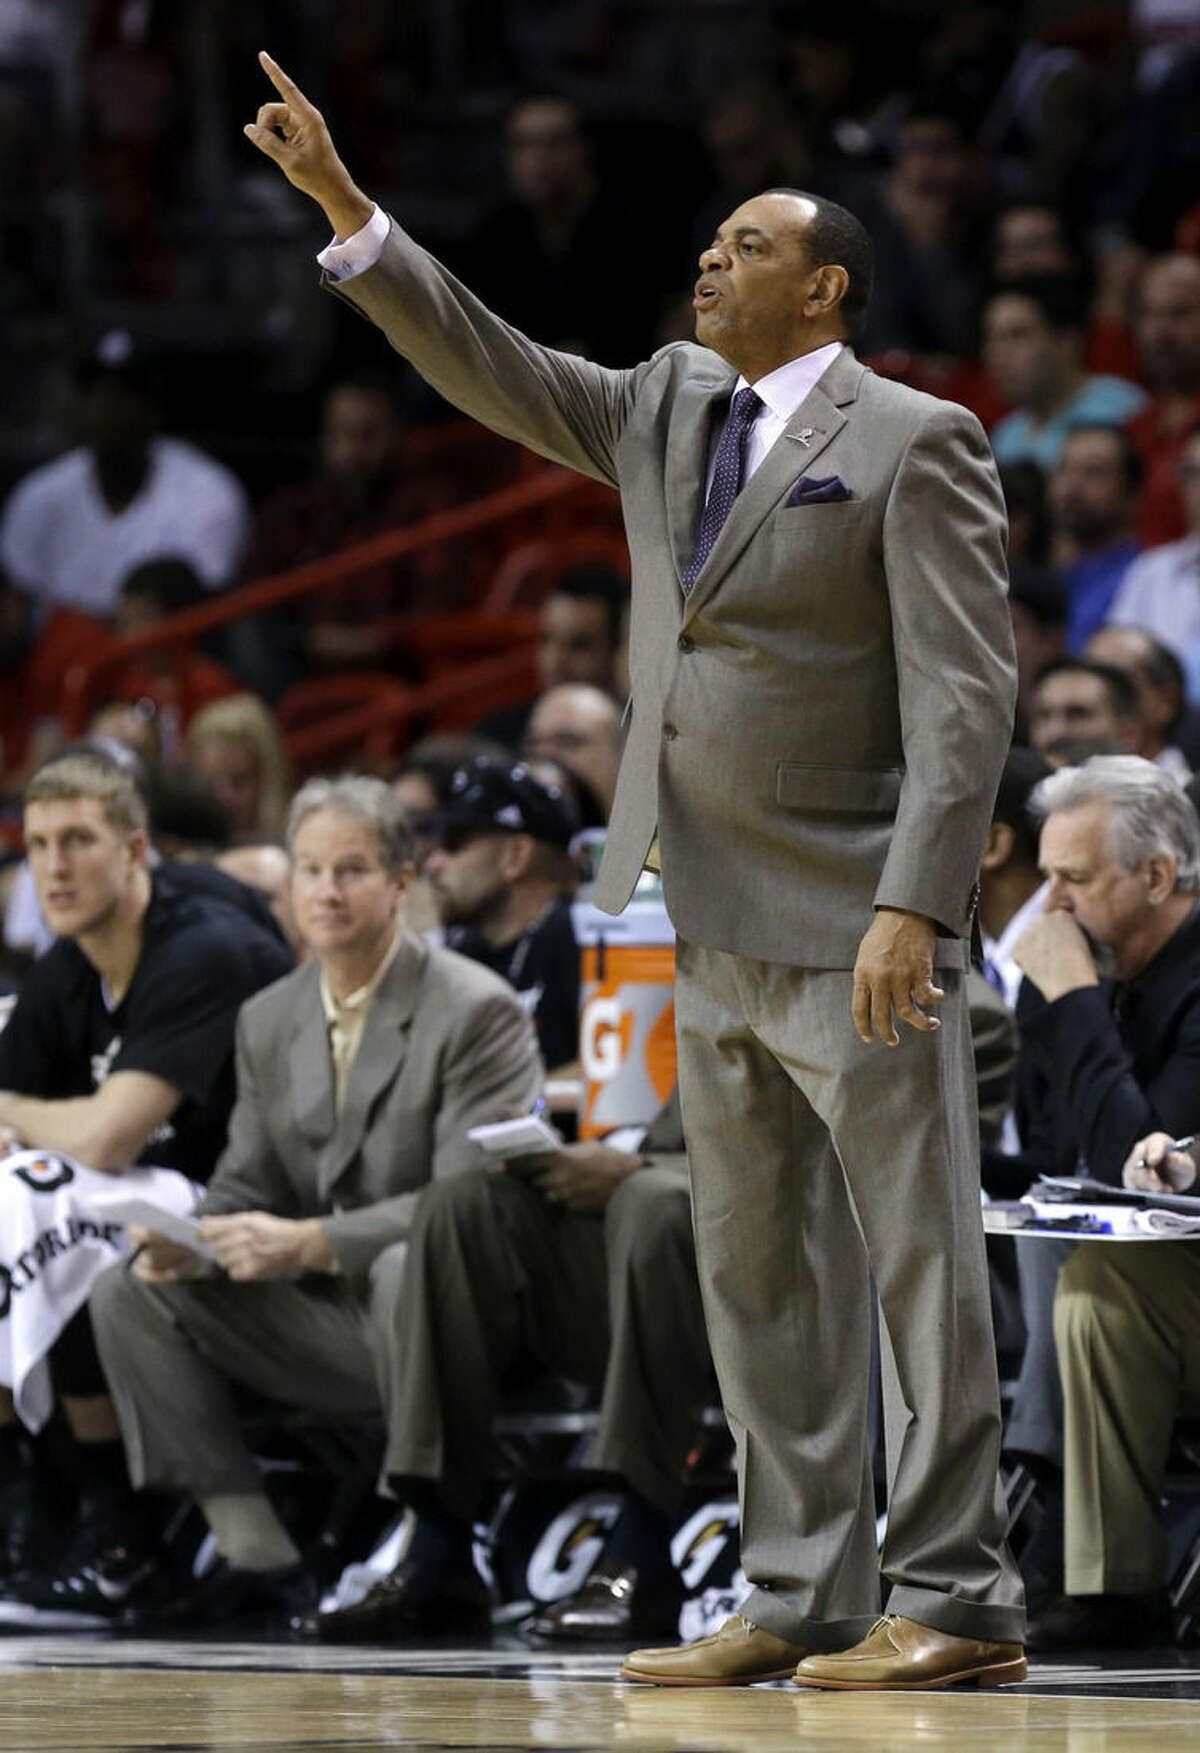 Brooklyn Nets head coach Lionel Hollins gestures during the first half of an NBA basketball game against the Miami Heat, Sunday, Jan. 4, 2015, in Miami. (AP Photo/Lynne Sladky)